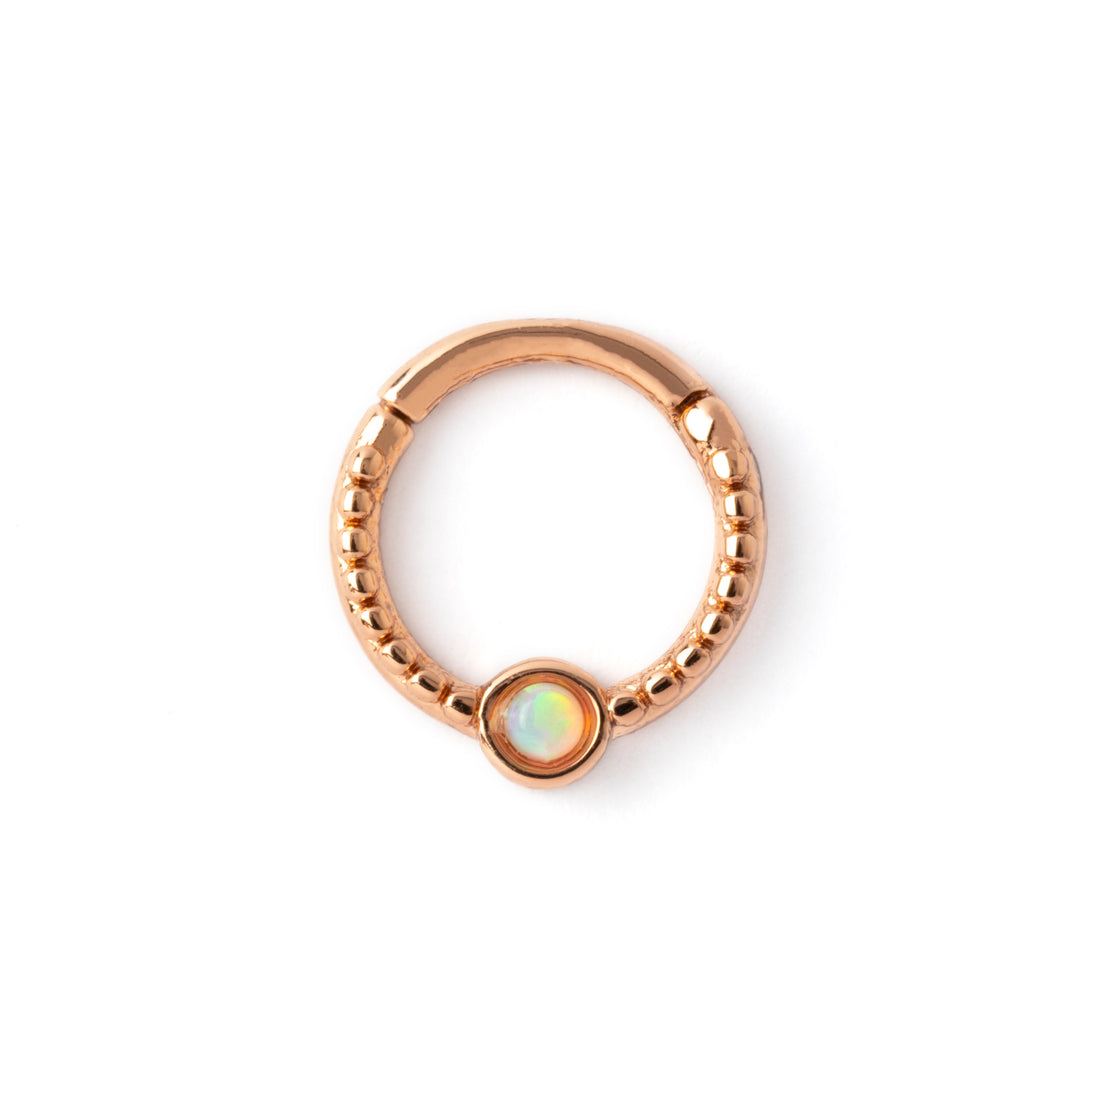 Dayaa rose gold surgical steel septum clicker with white opal frontal view